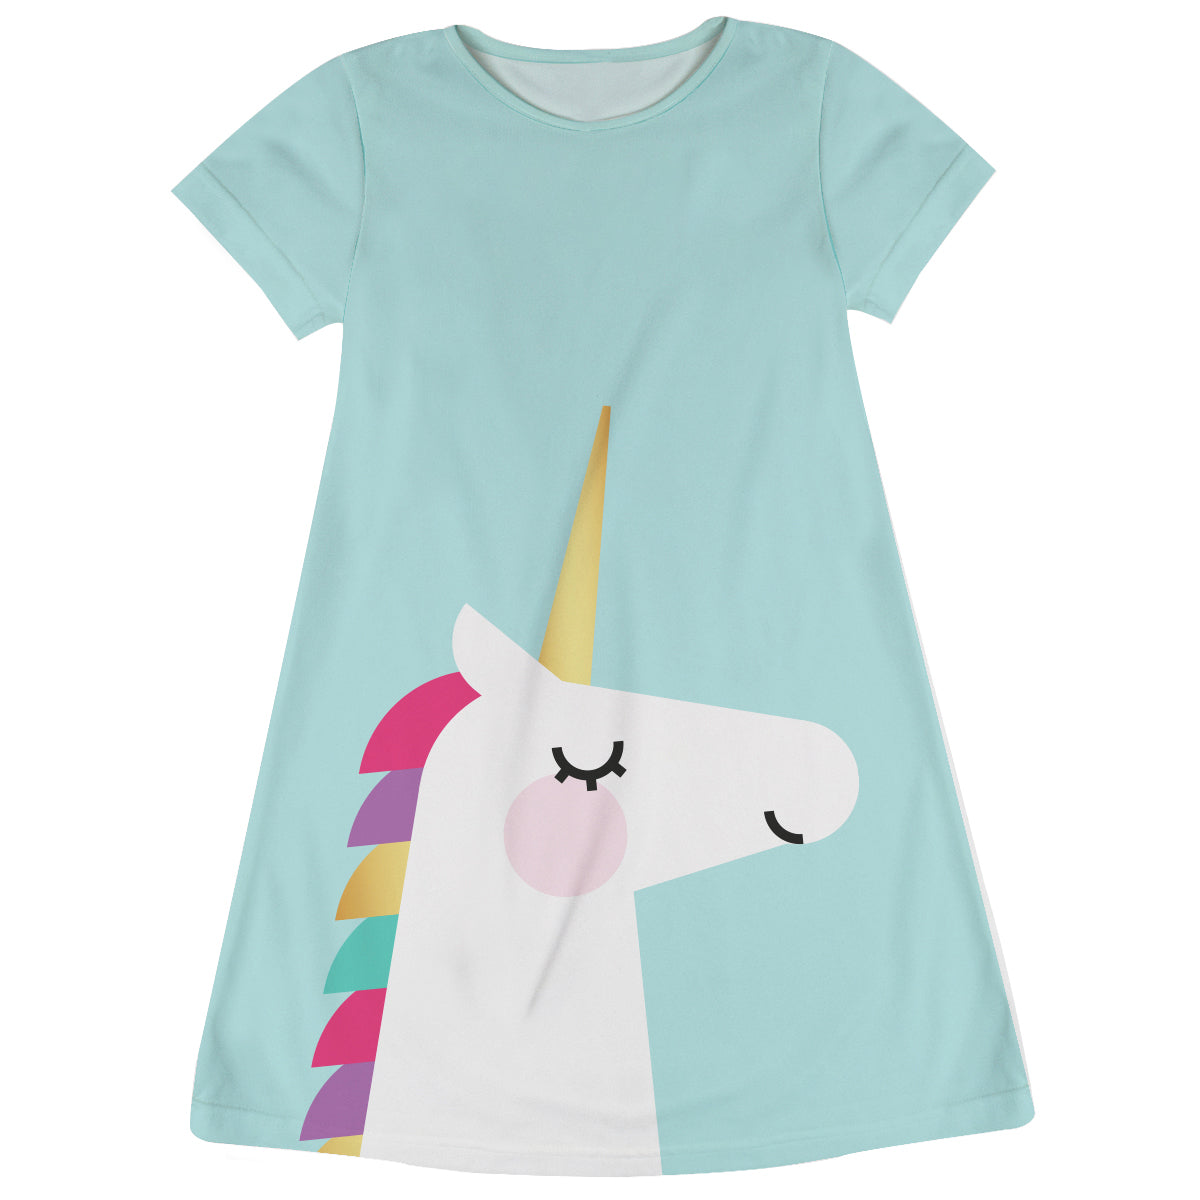 Light blue and white unicorn a line dress with name - Wimziy&Co.